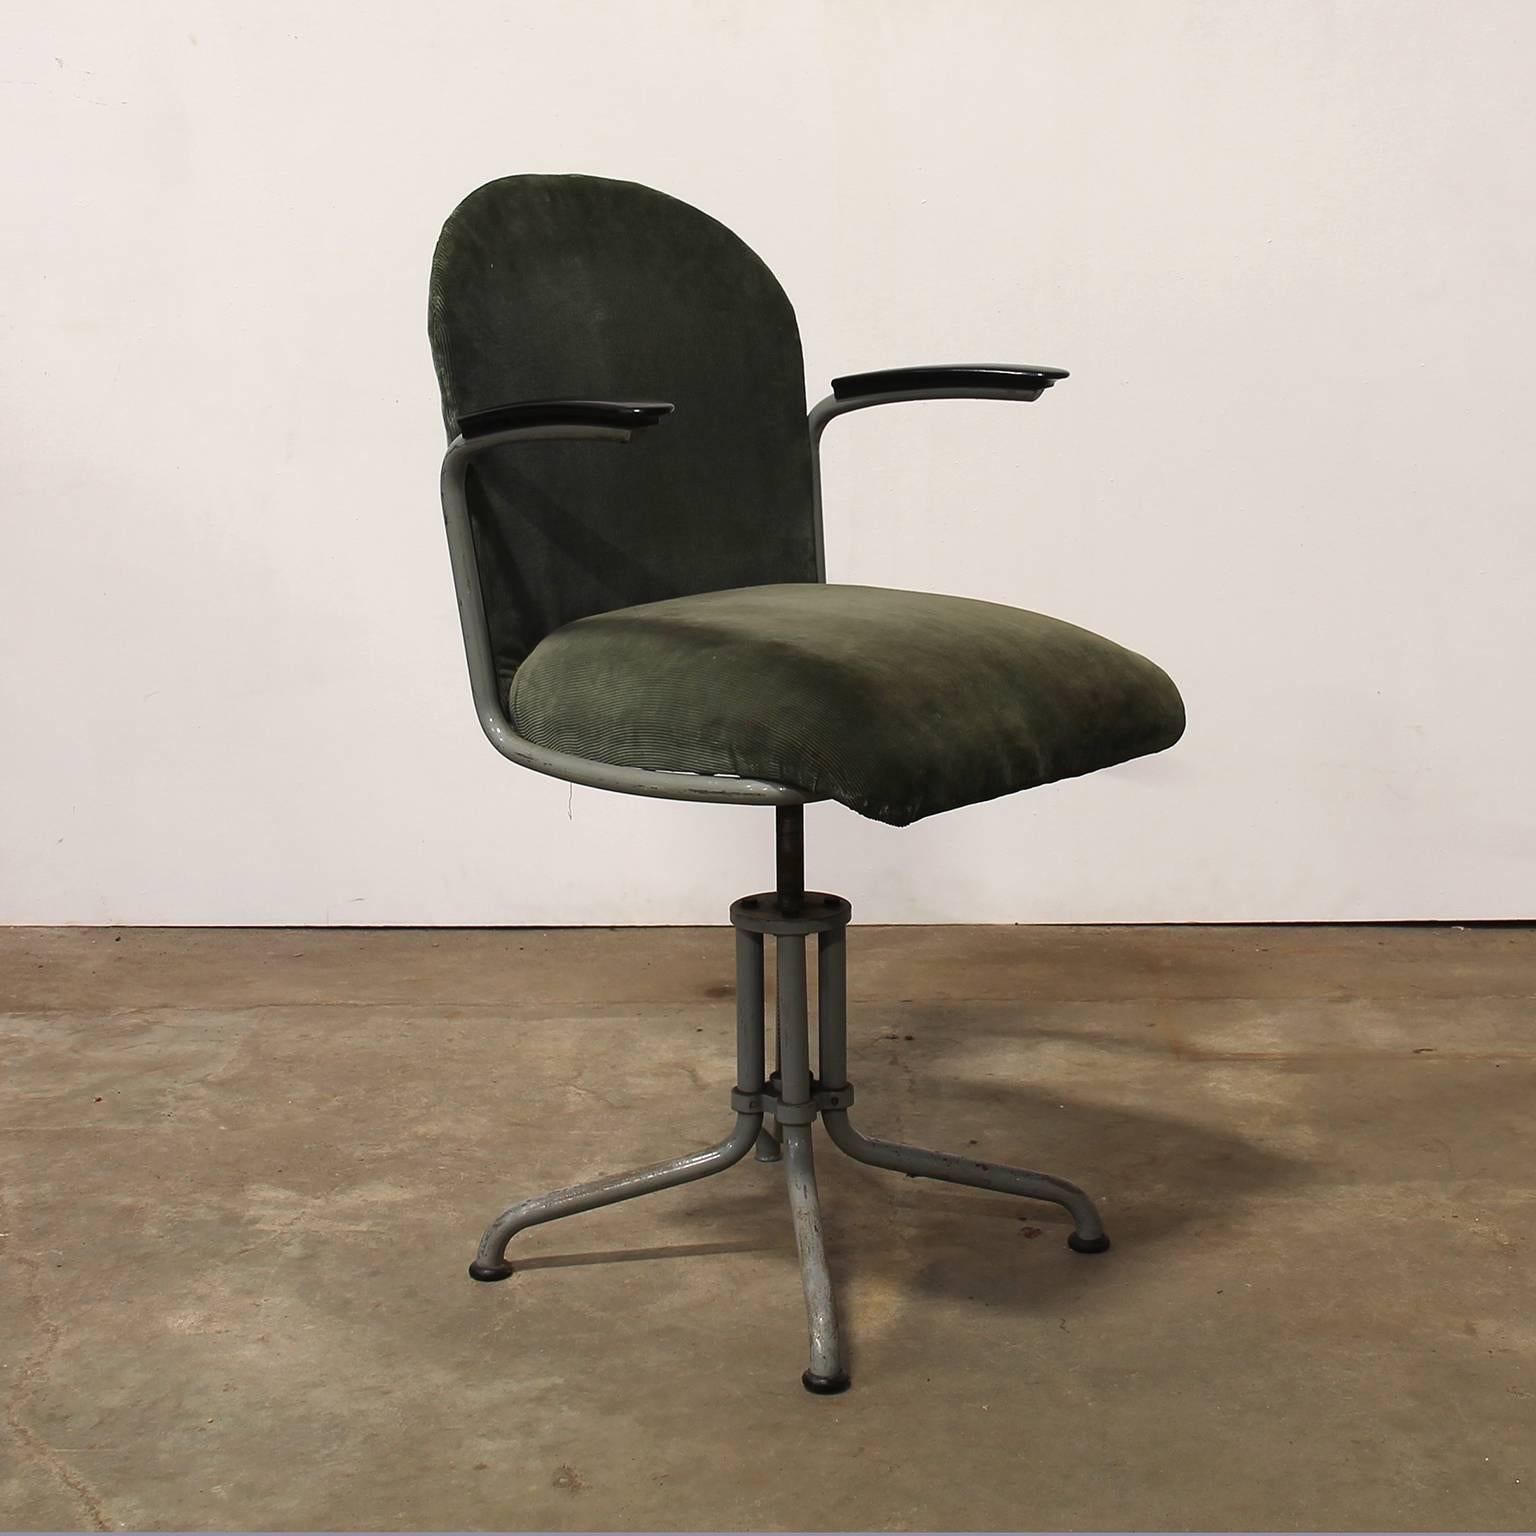 Desk chair with very rare grey painted base and with bakelite armrests, original upholstery in grey-green Manchester. The height is manual adjustable. The original upholstery is a beautiful grey/green color. The fabric shows some slight traces of